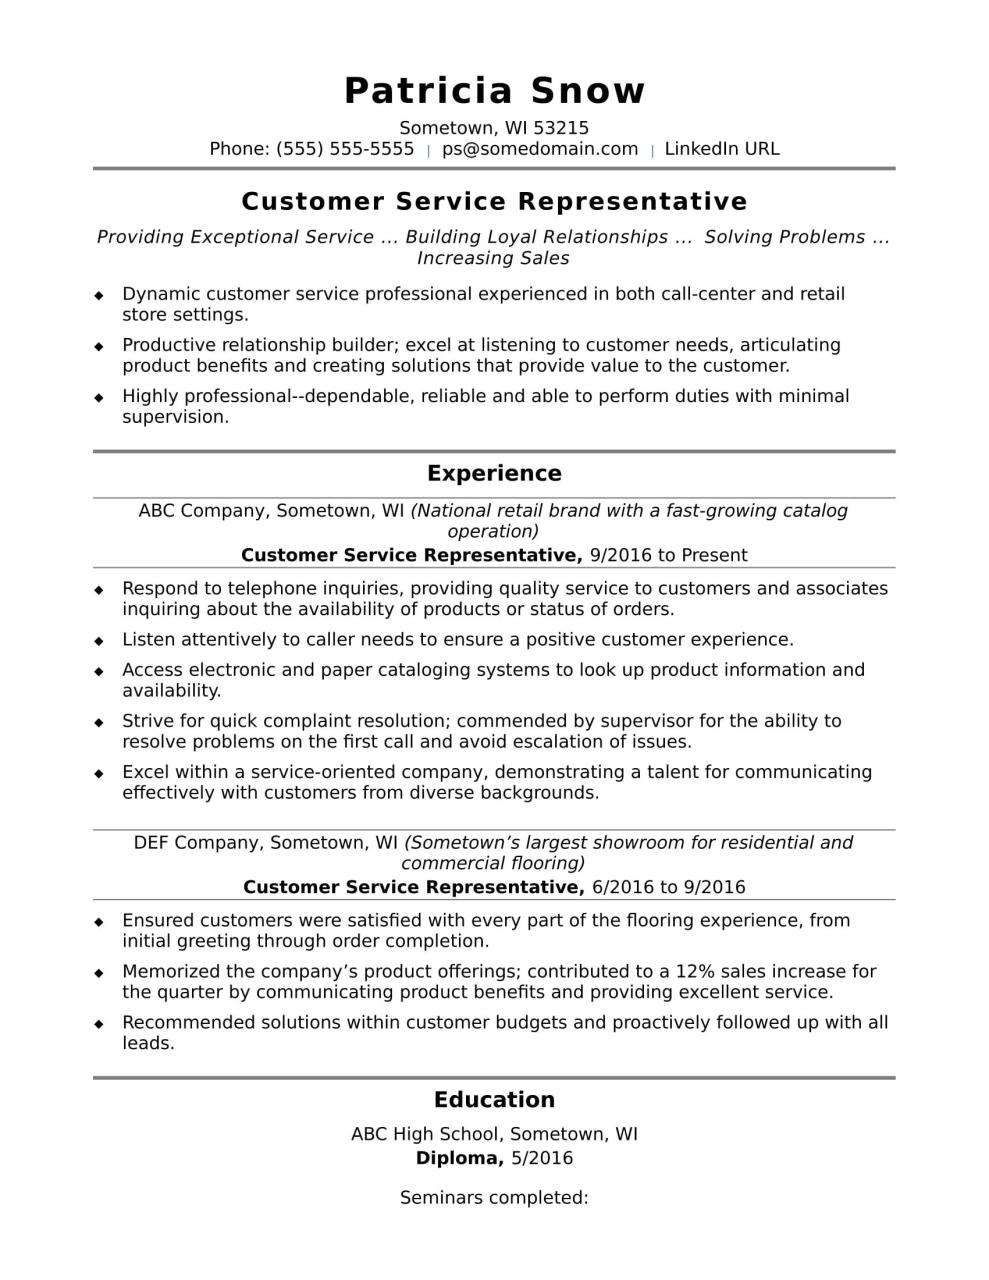 Resume Samples For Customer Service Positions